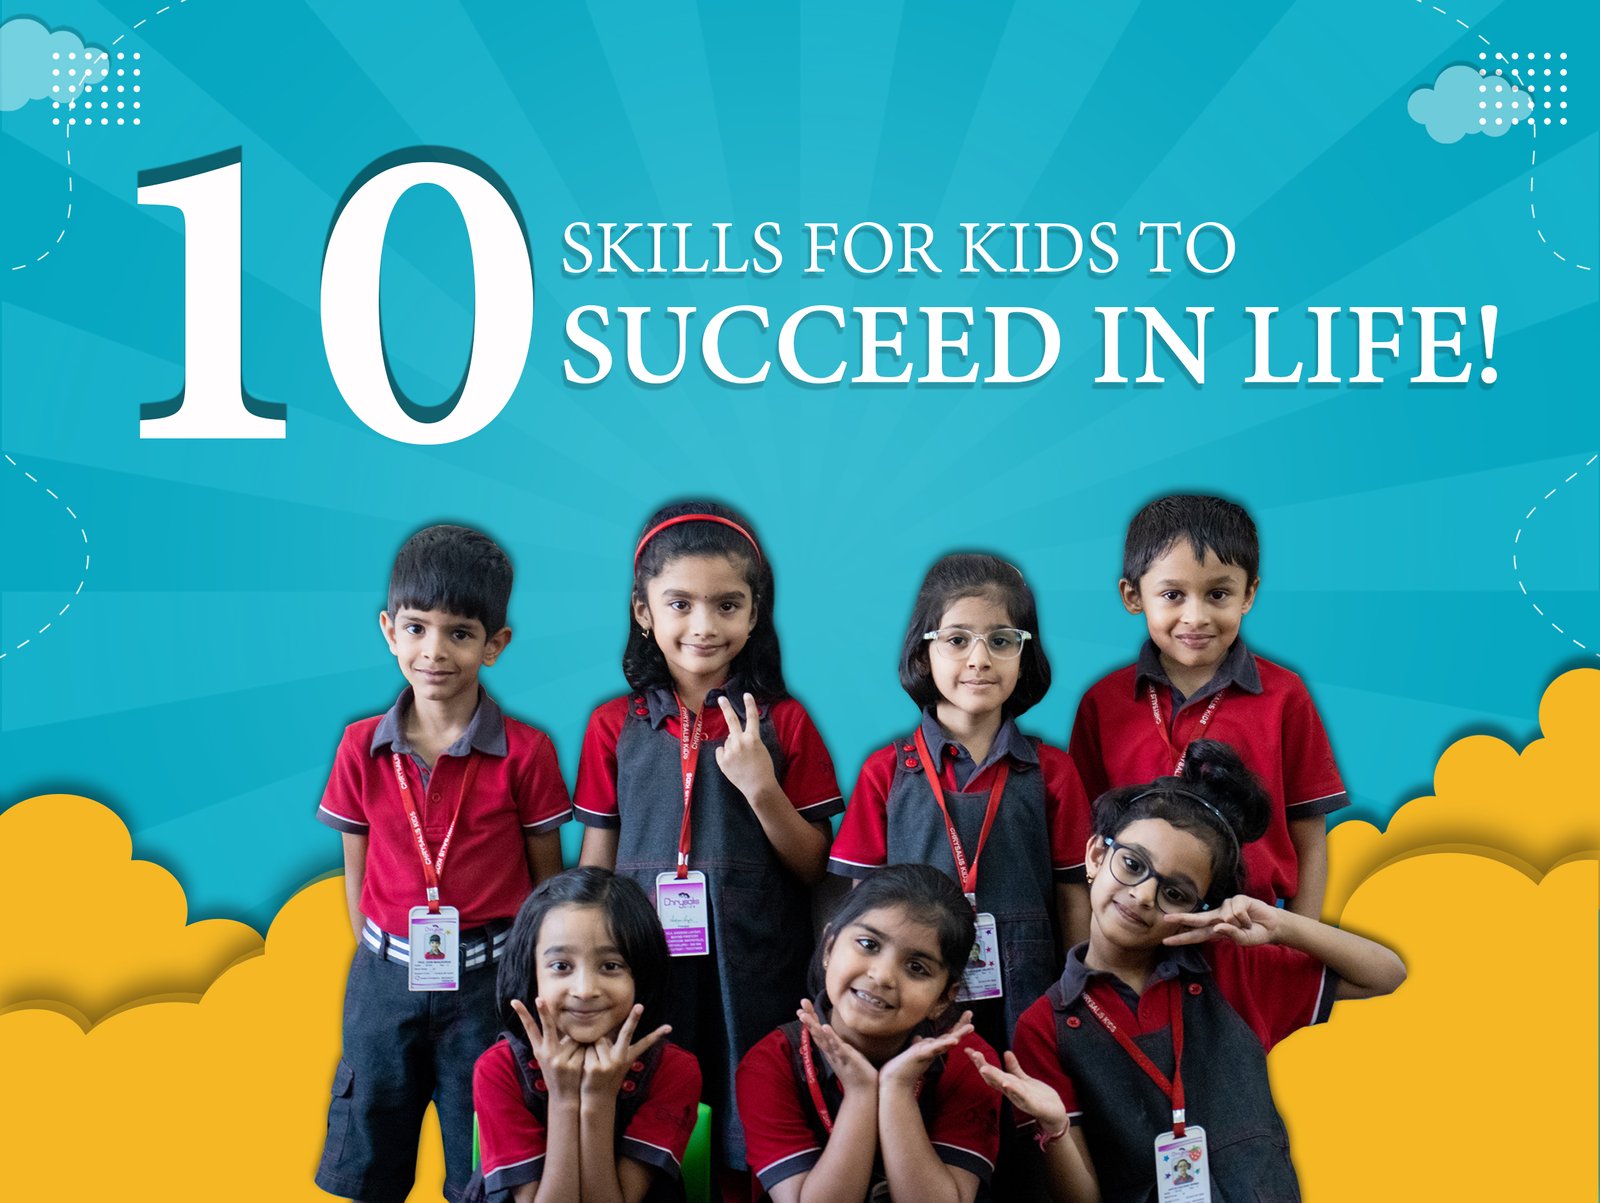 skills for kids to succeed in life poster